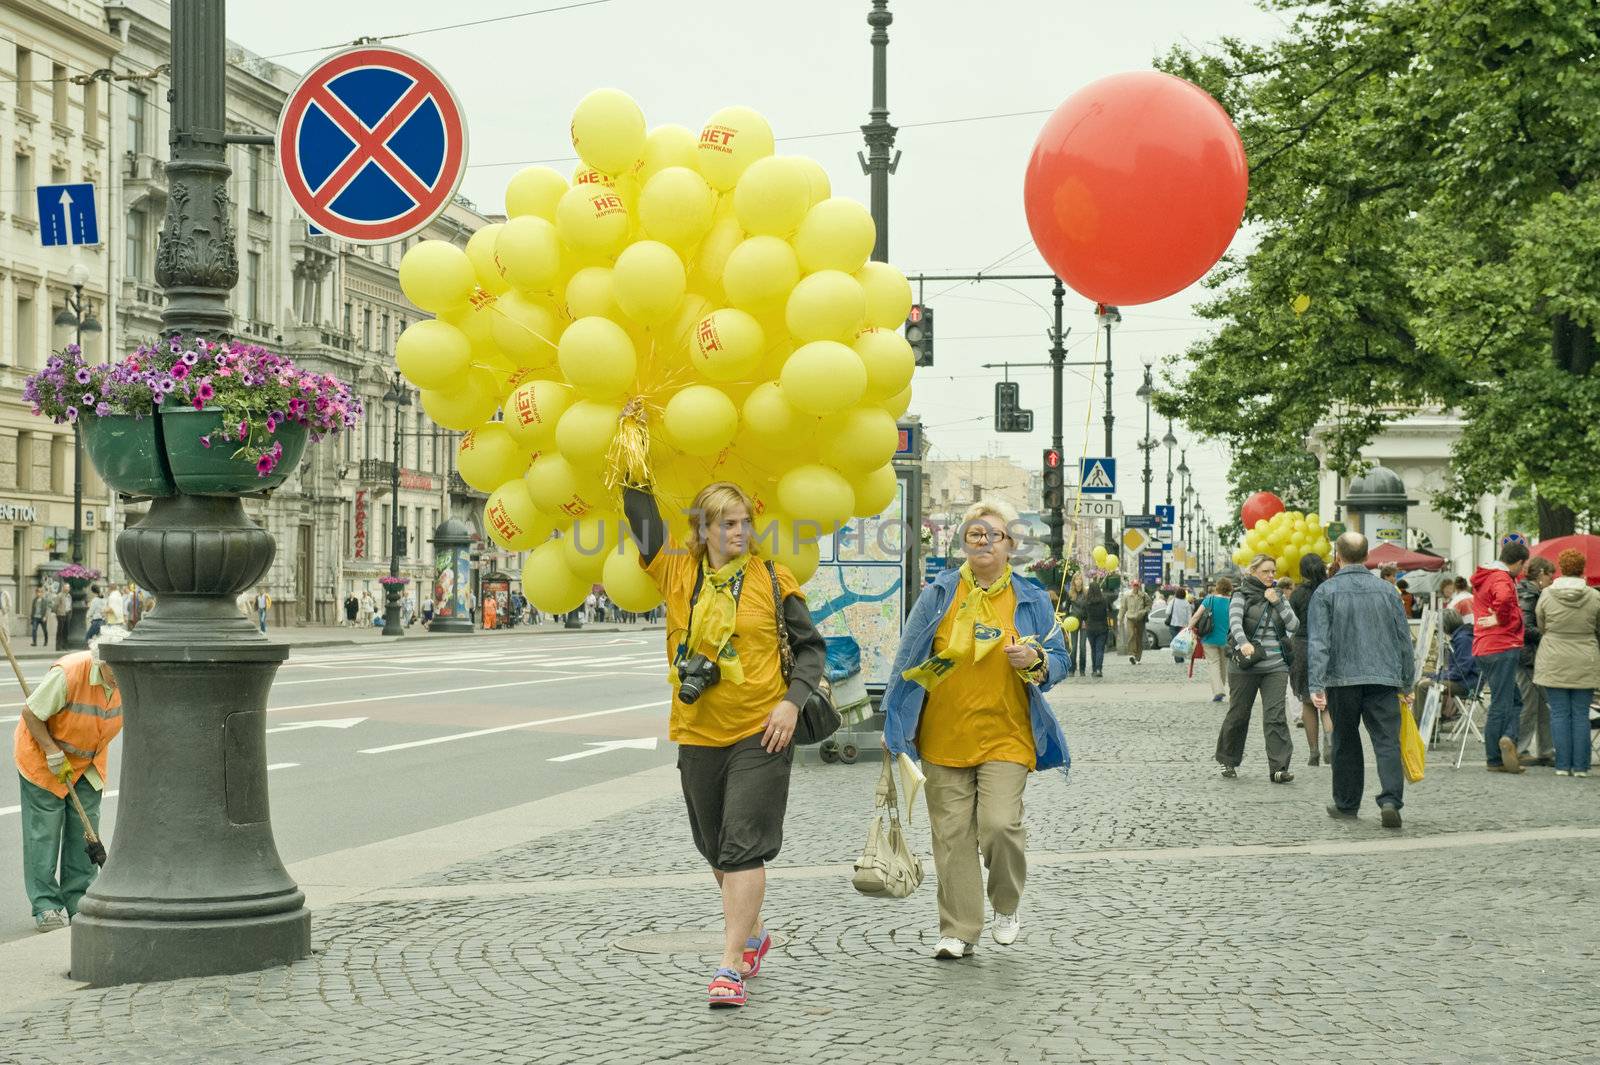 Two woman with yellow and re balloons, taken in St Petersburg, Russia.